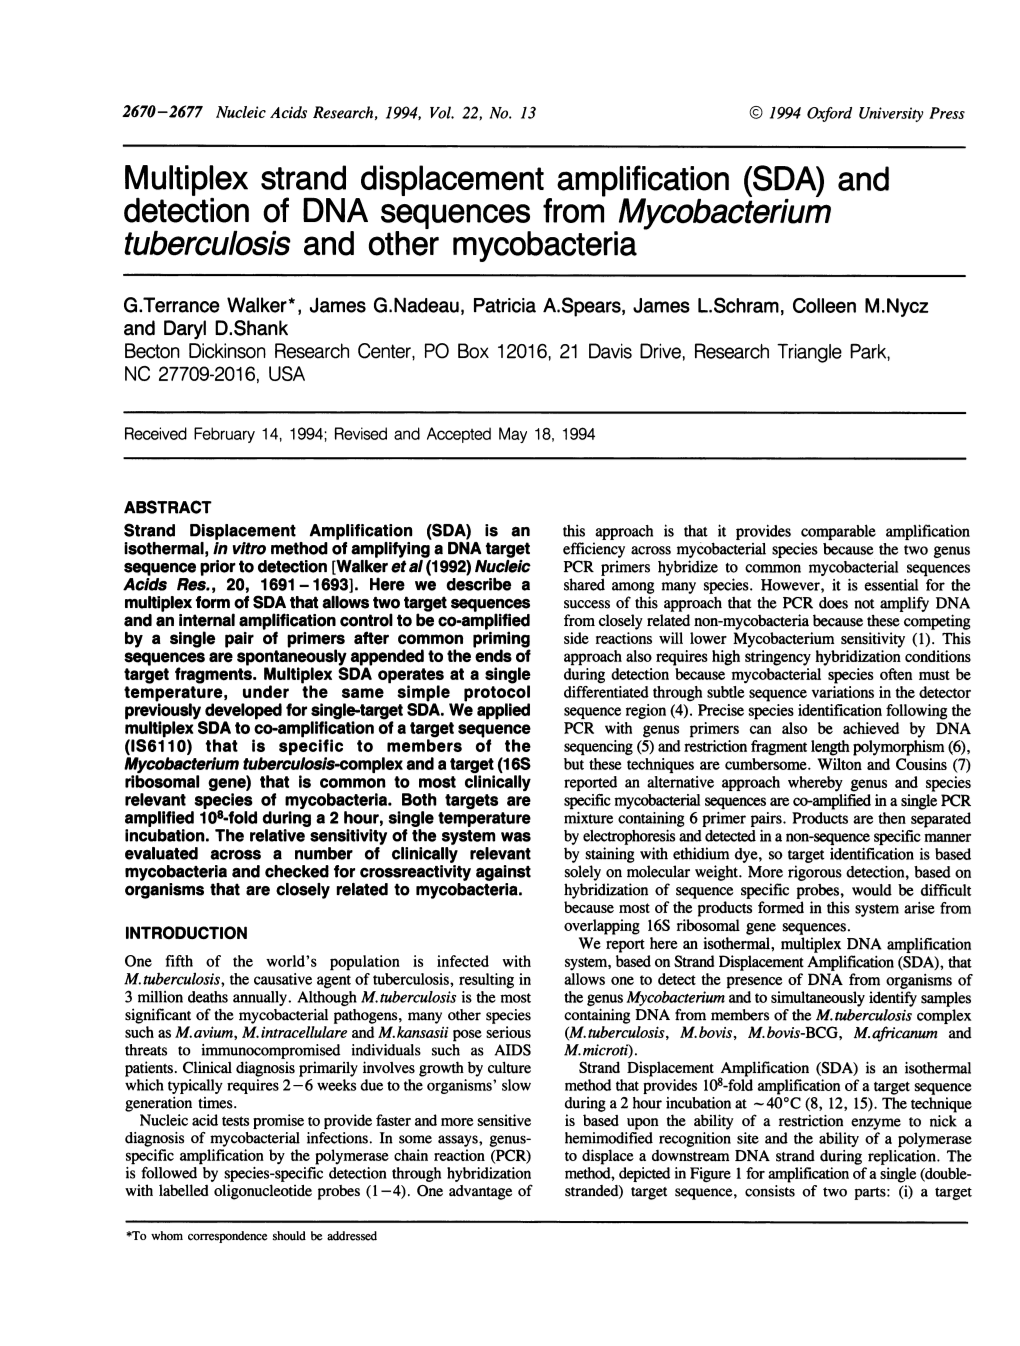 Detection of DNA Sequences from Mycobacterium Tuberculosis and Other Mycobacteria